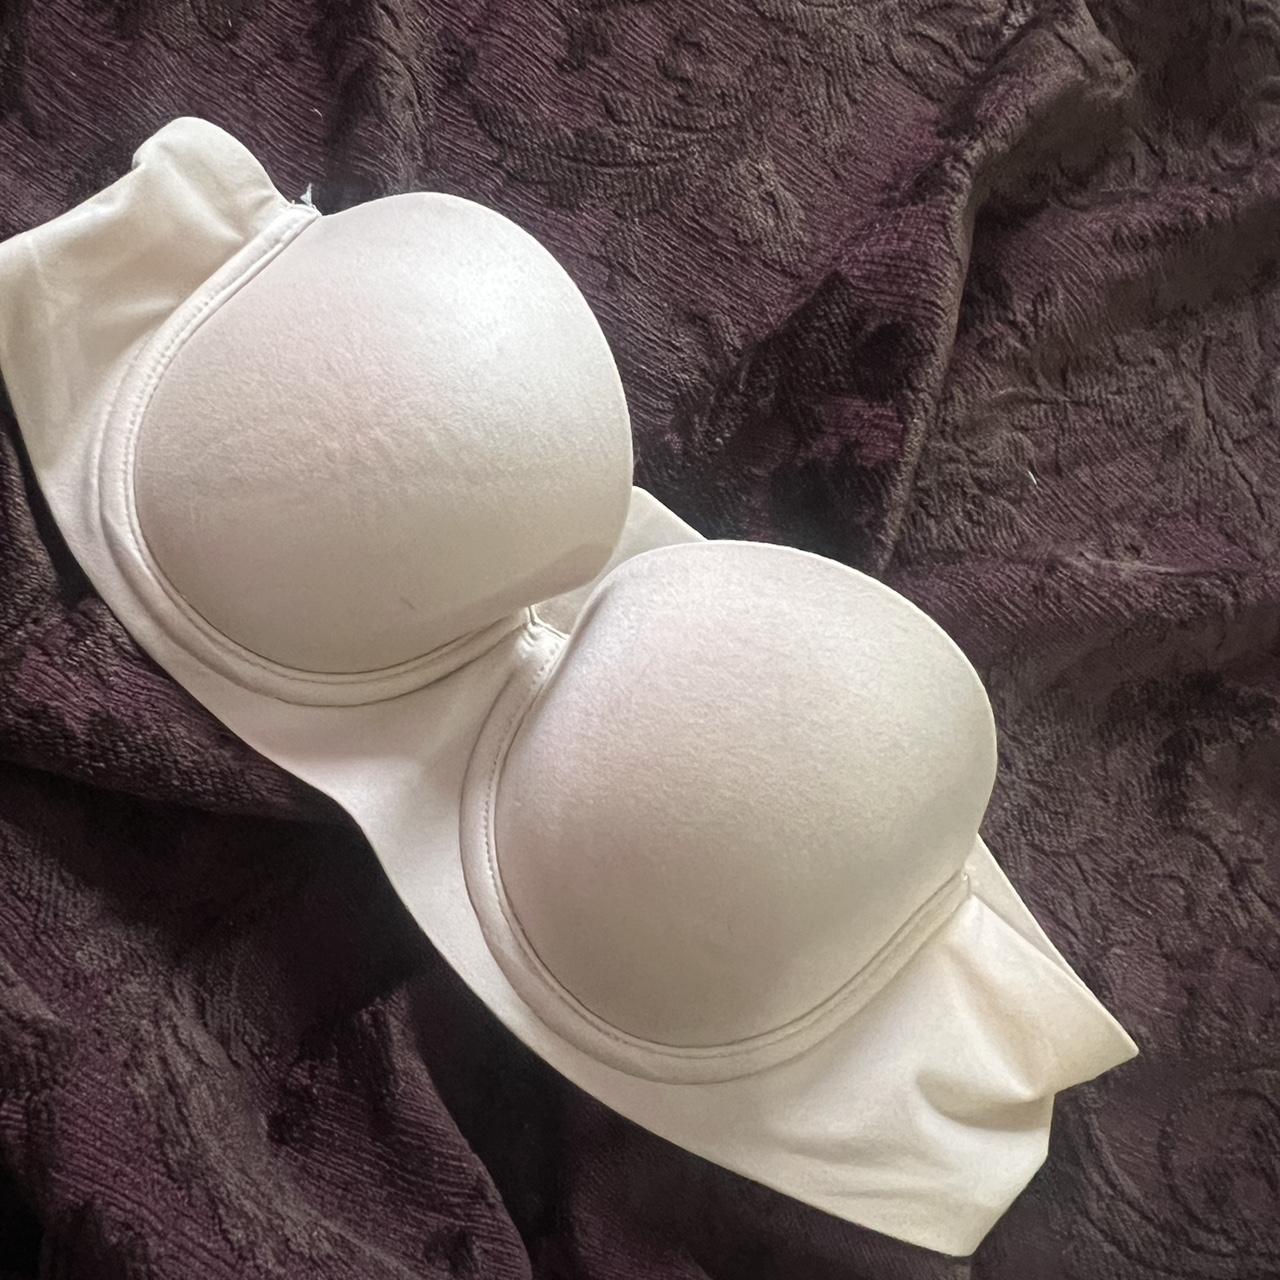 Small (34A - 34B according to website) 2022 green - Depop